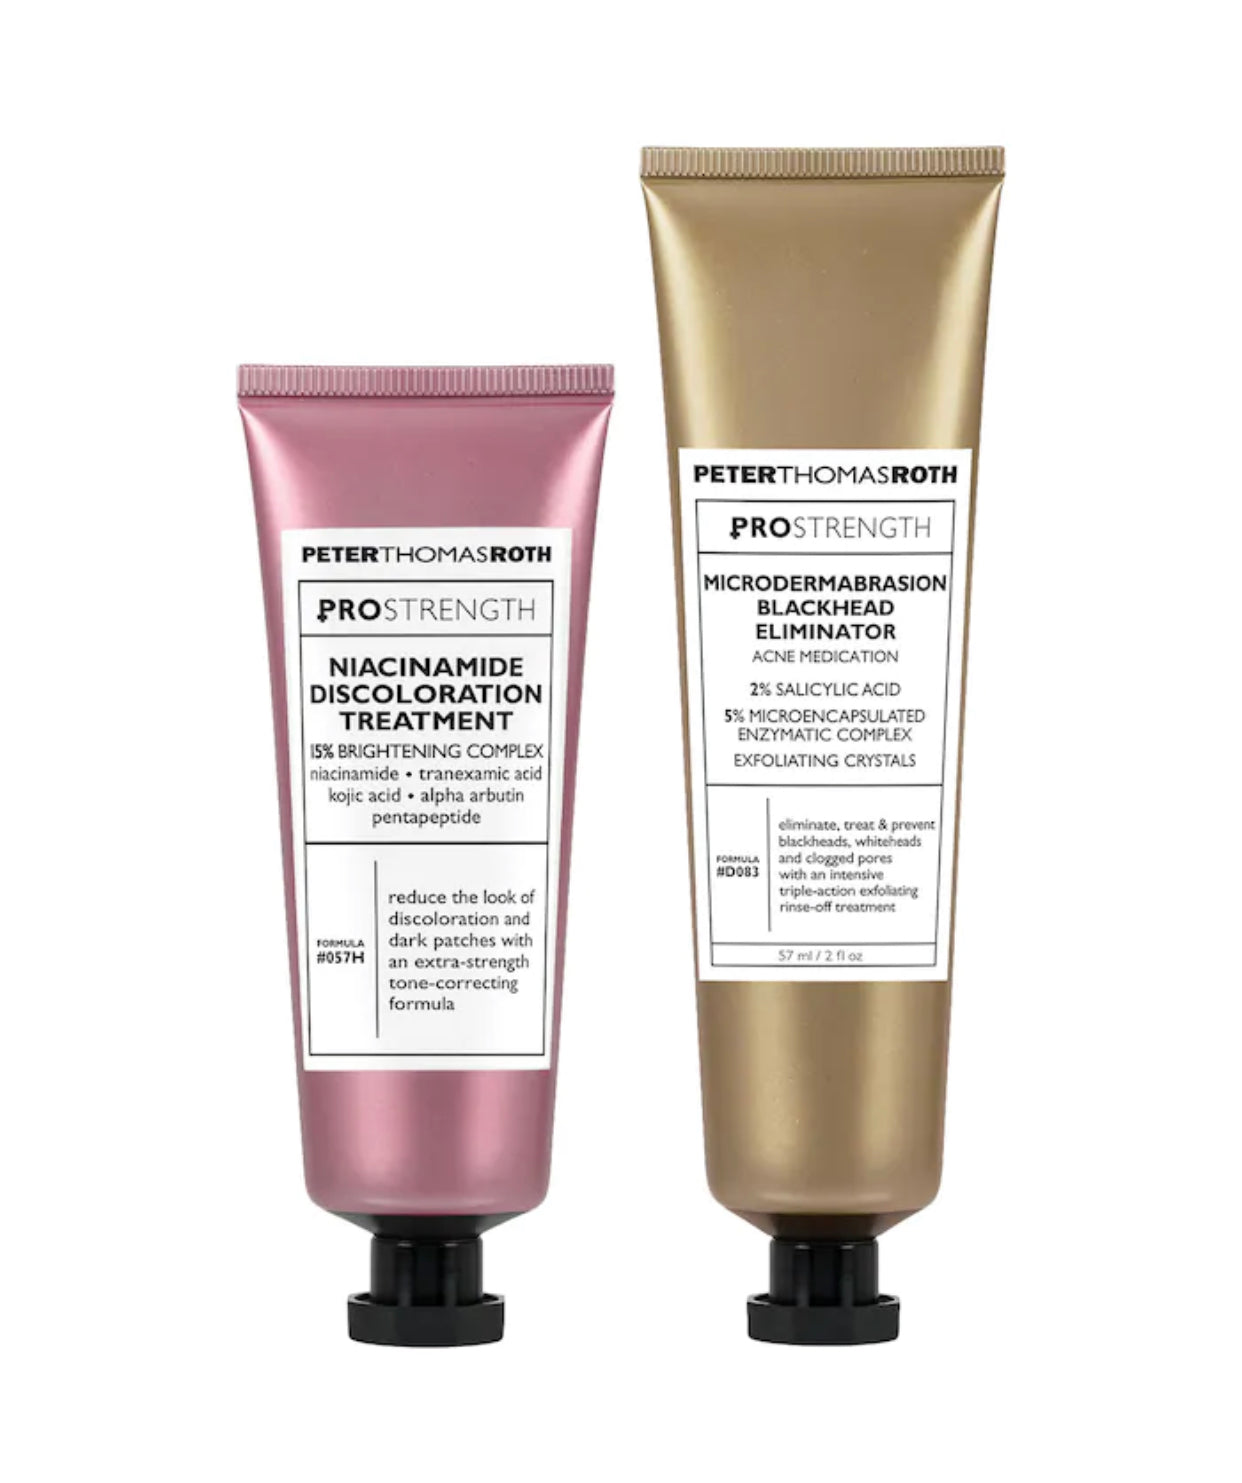 PETER THOMAS ROTH, FULL SIZE PRO STRENGHT MUST HAVES 2 PIECE KIT